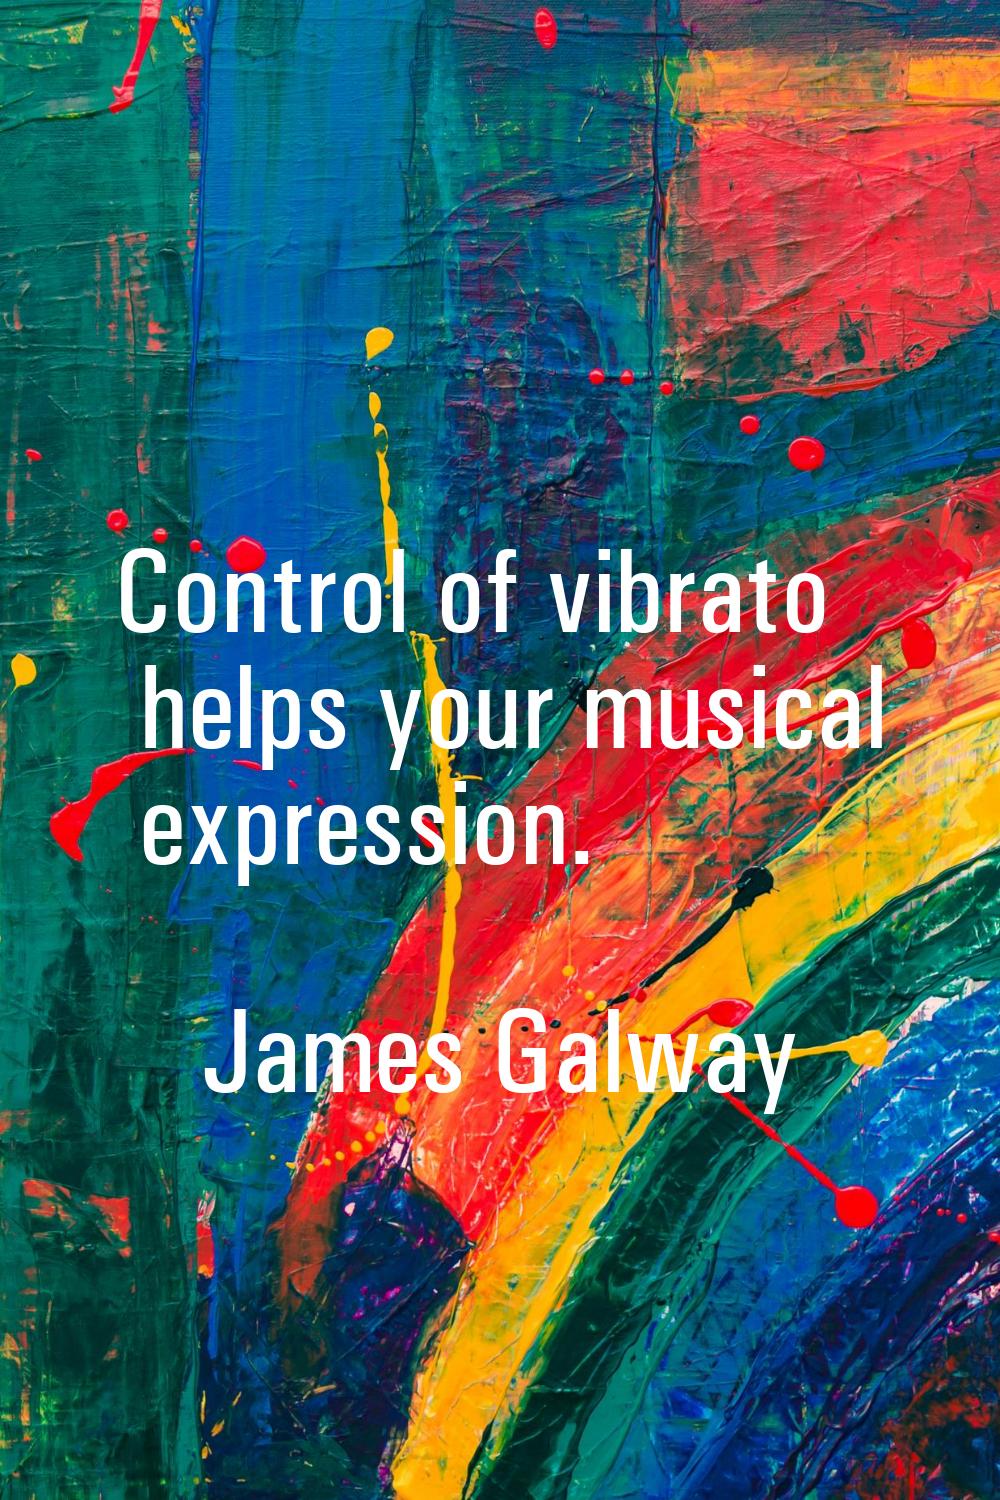 Control of vibrato helps your musical expression.